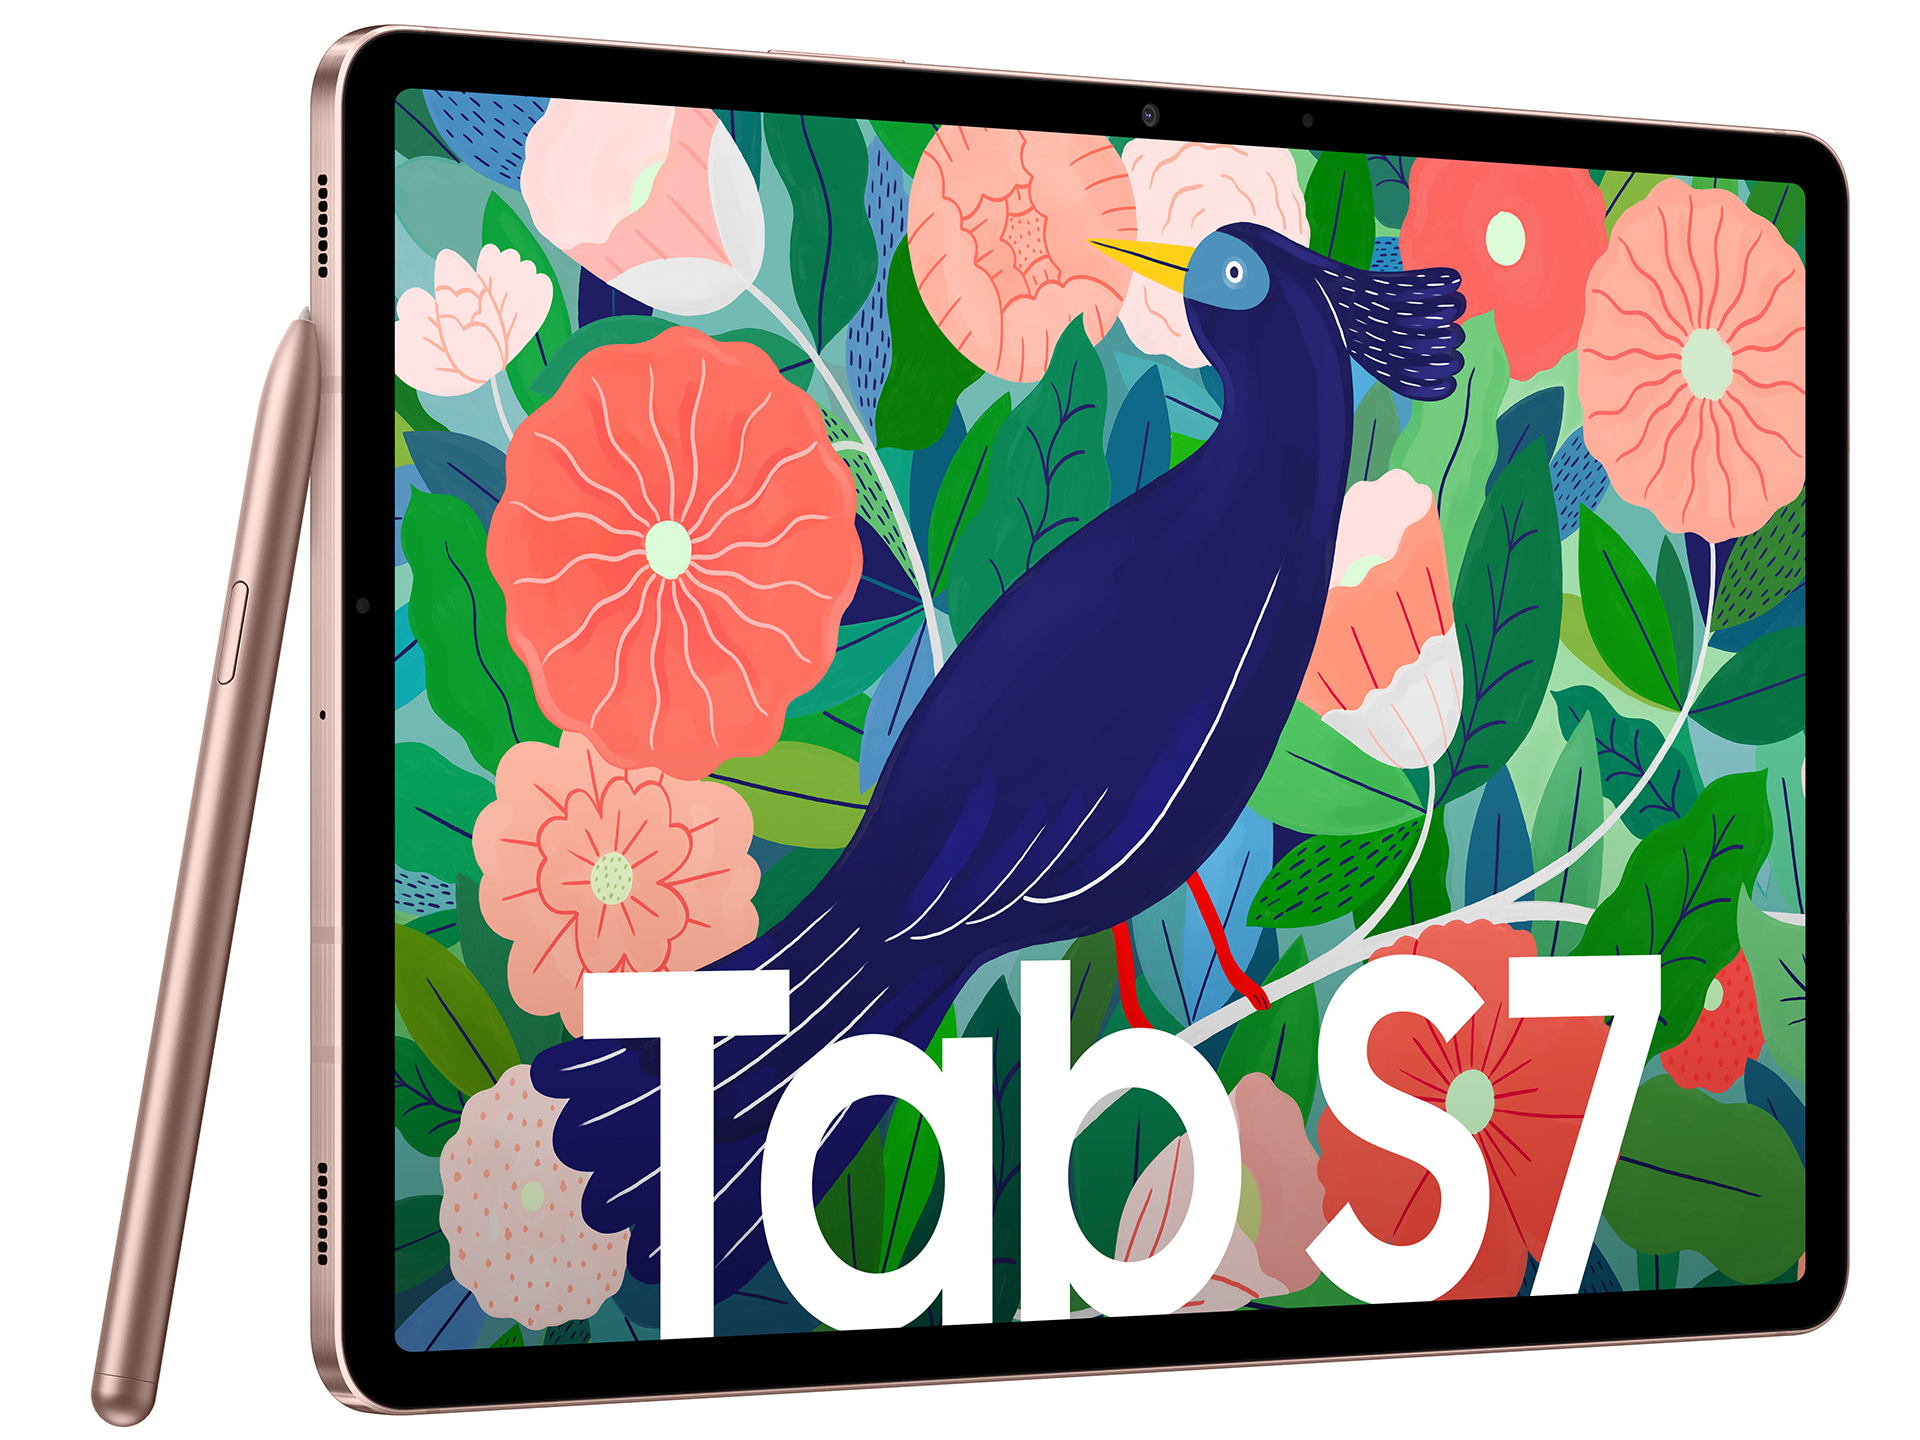 Samsung launches Galaxy Tab S7 FE starting at $529